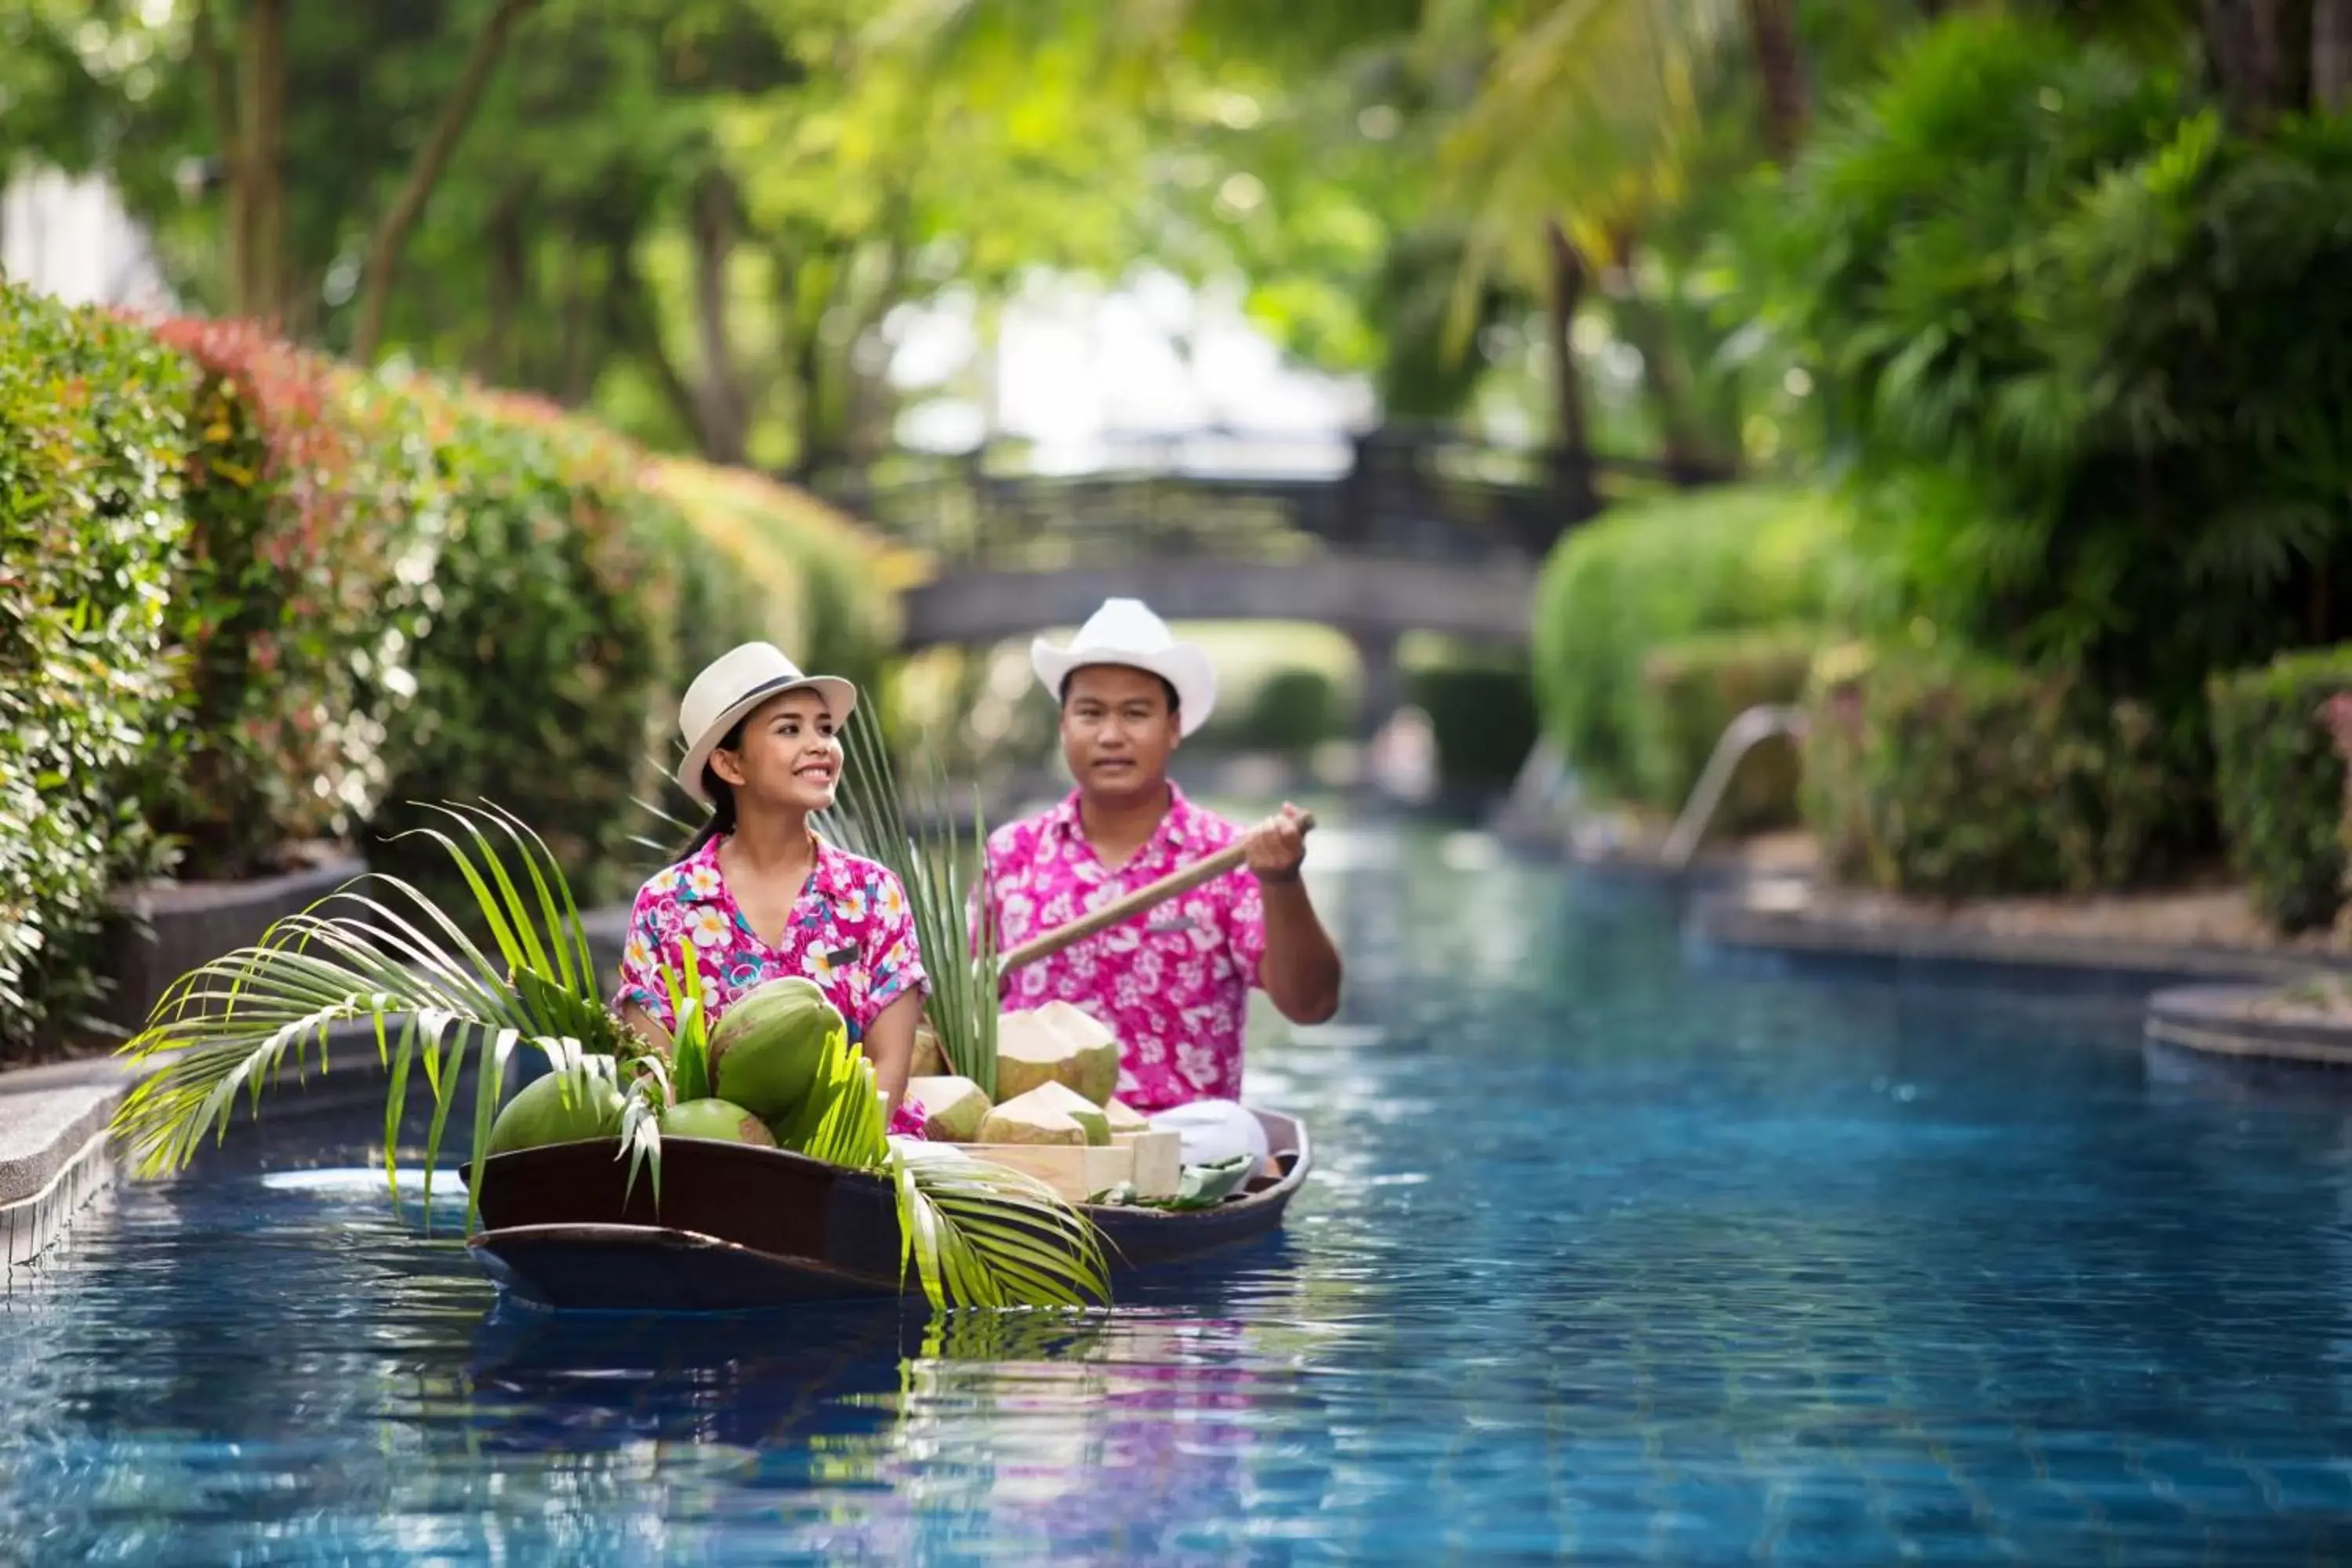 Other in JW Marriott Khao Lak Resort and Spa